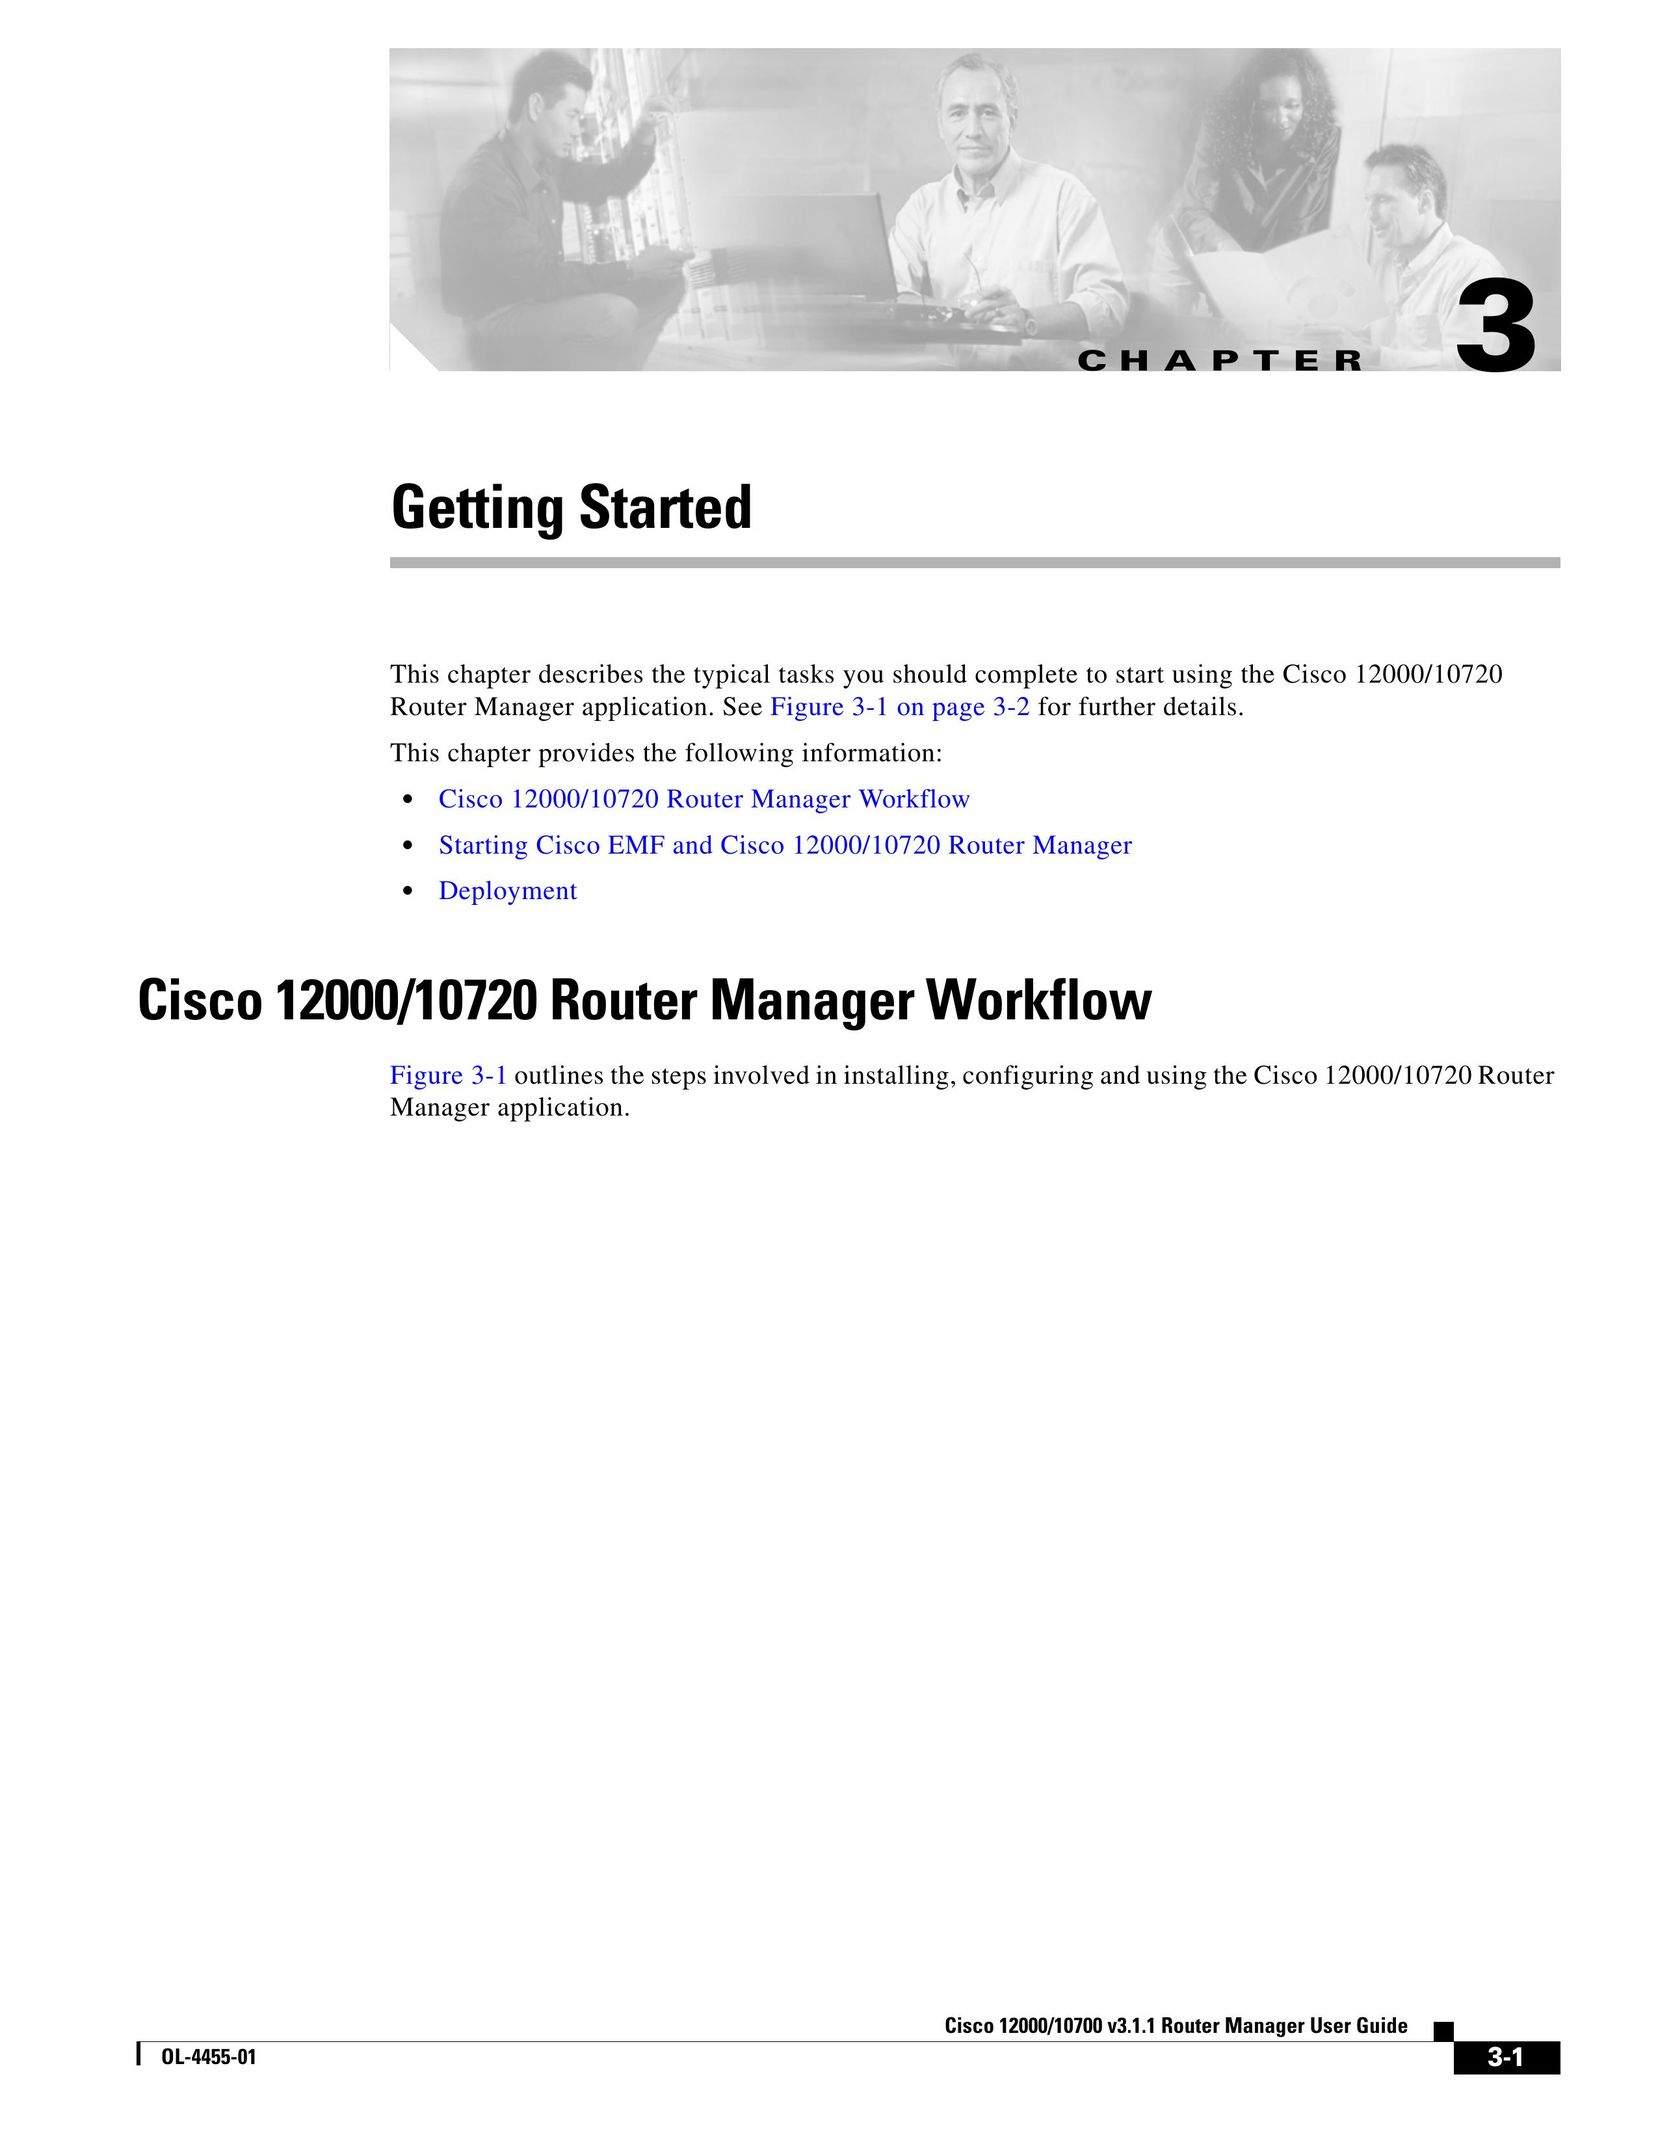 Cisco Systems 10720 Network Router User Manual